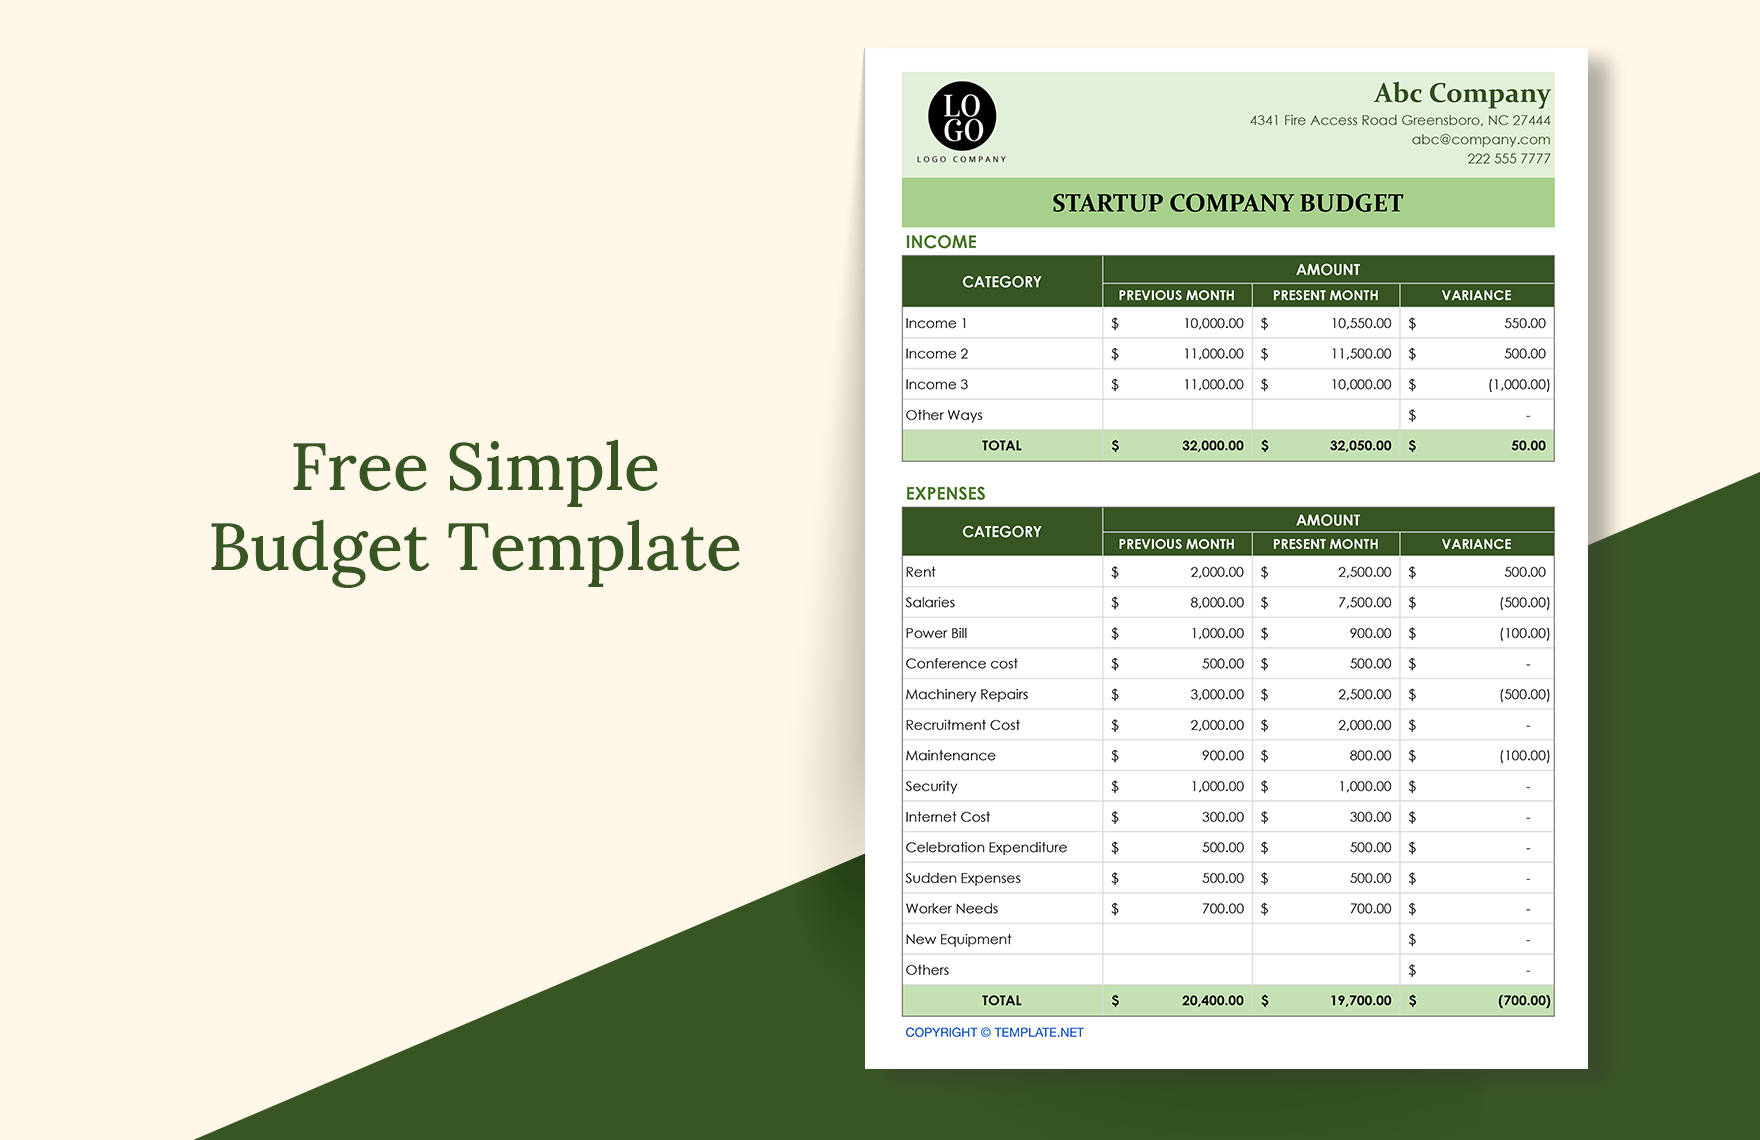 Free Simple Budget Template